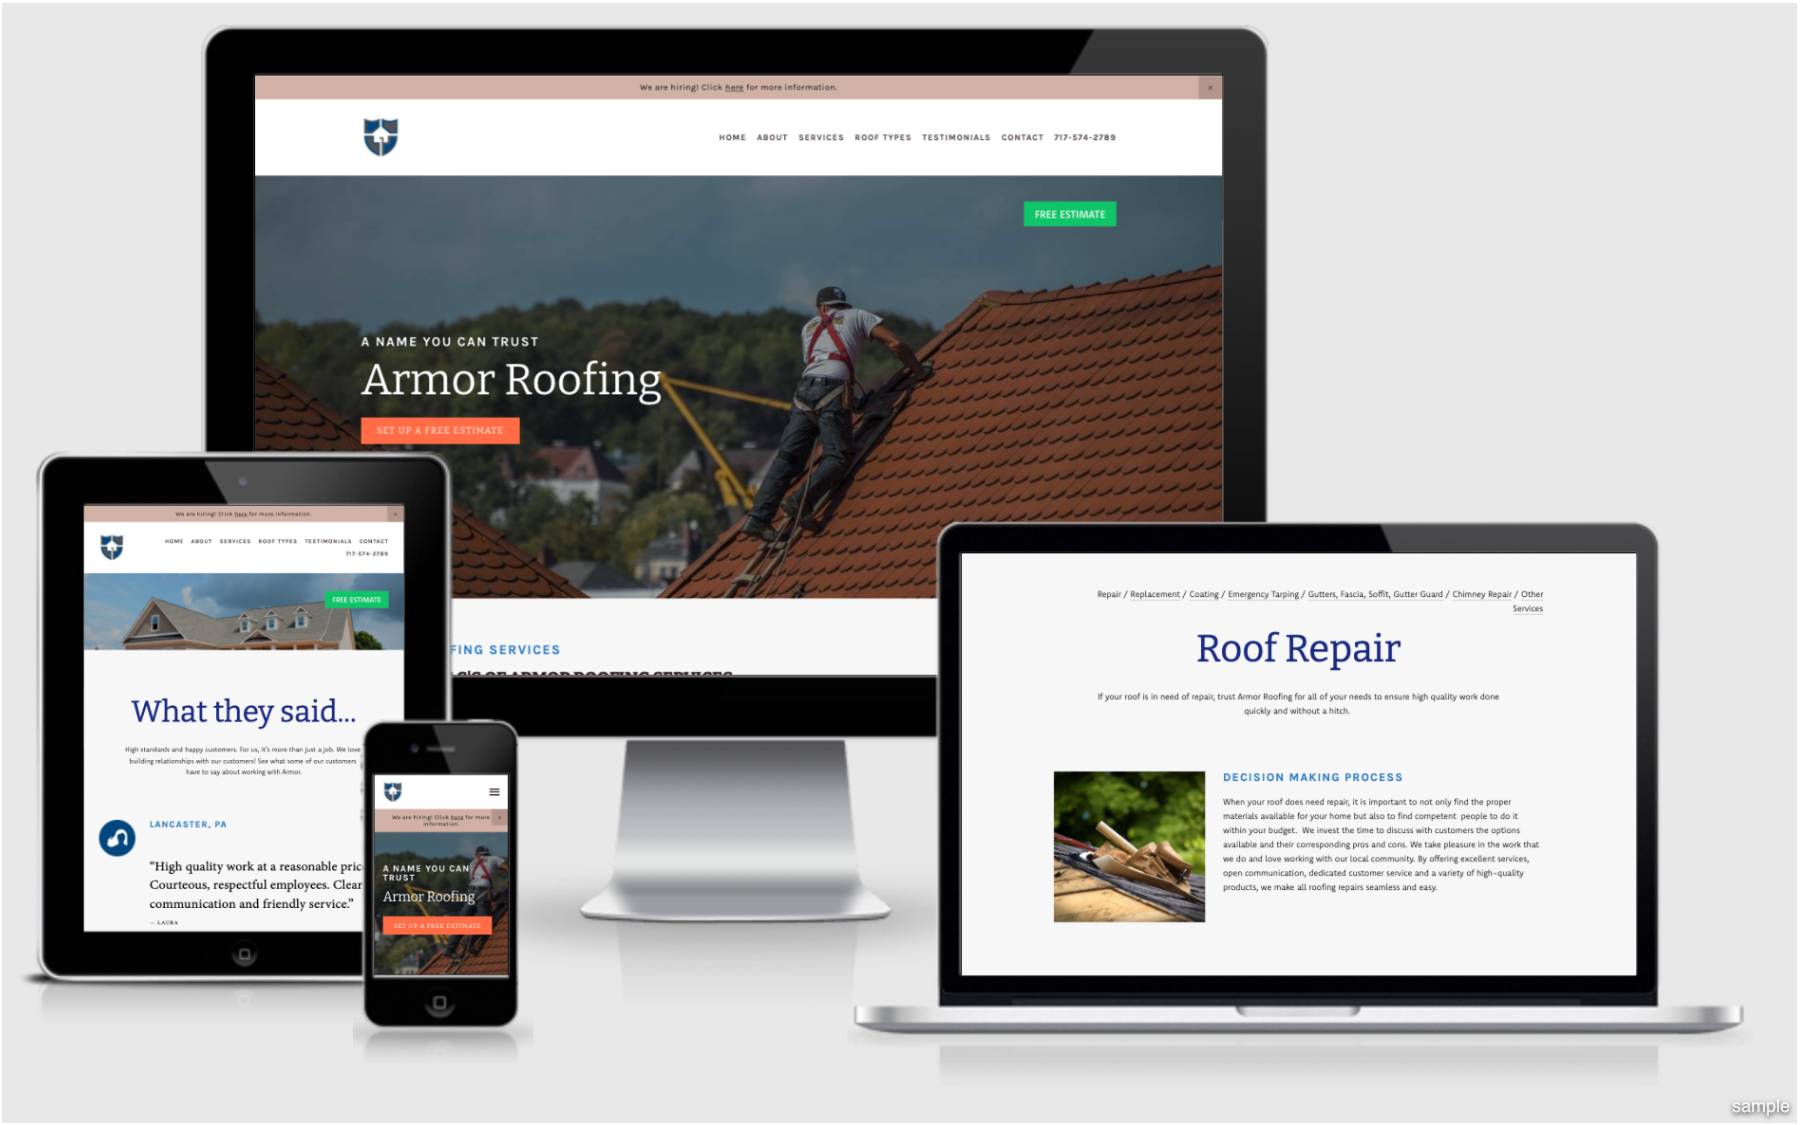 launch-kits-roofing company-websites-005